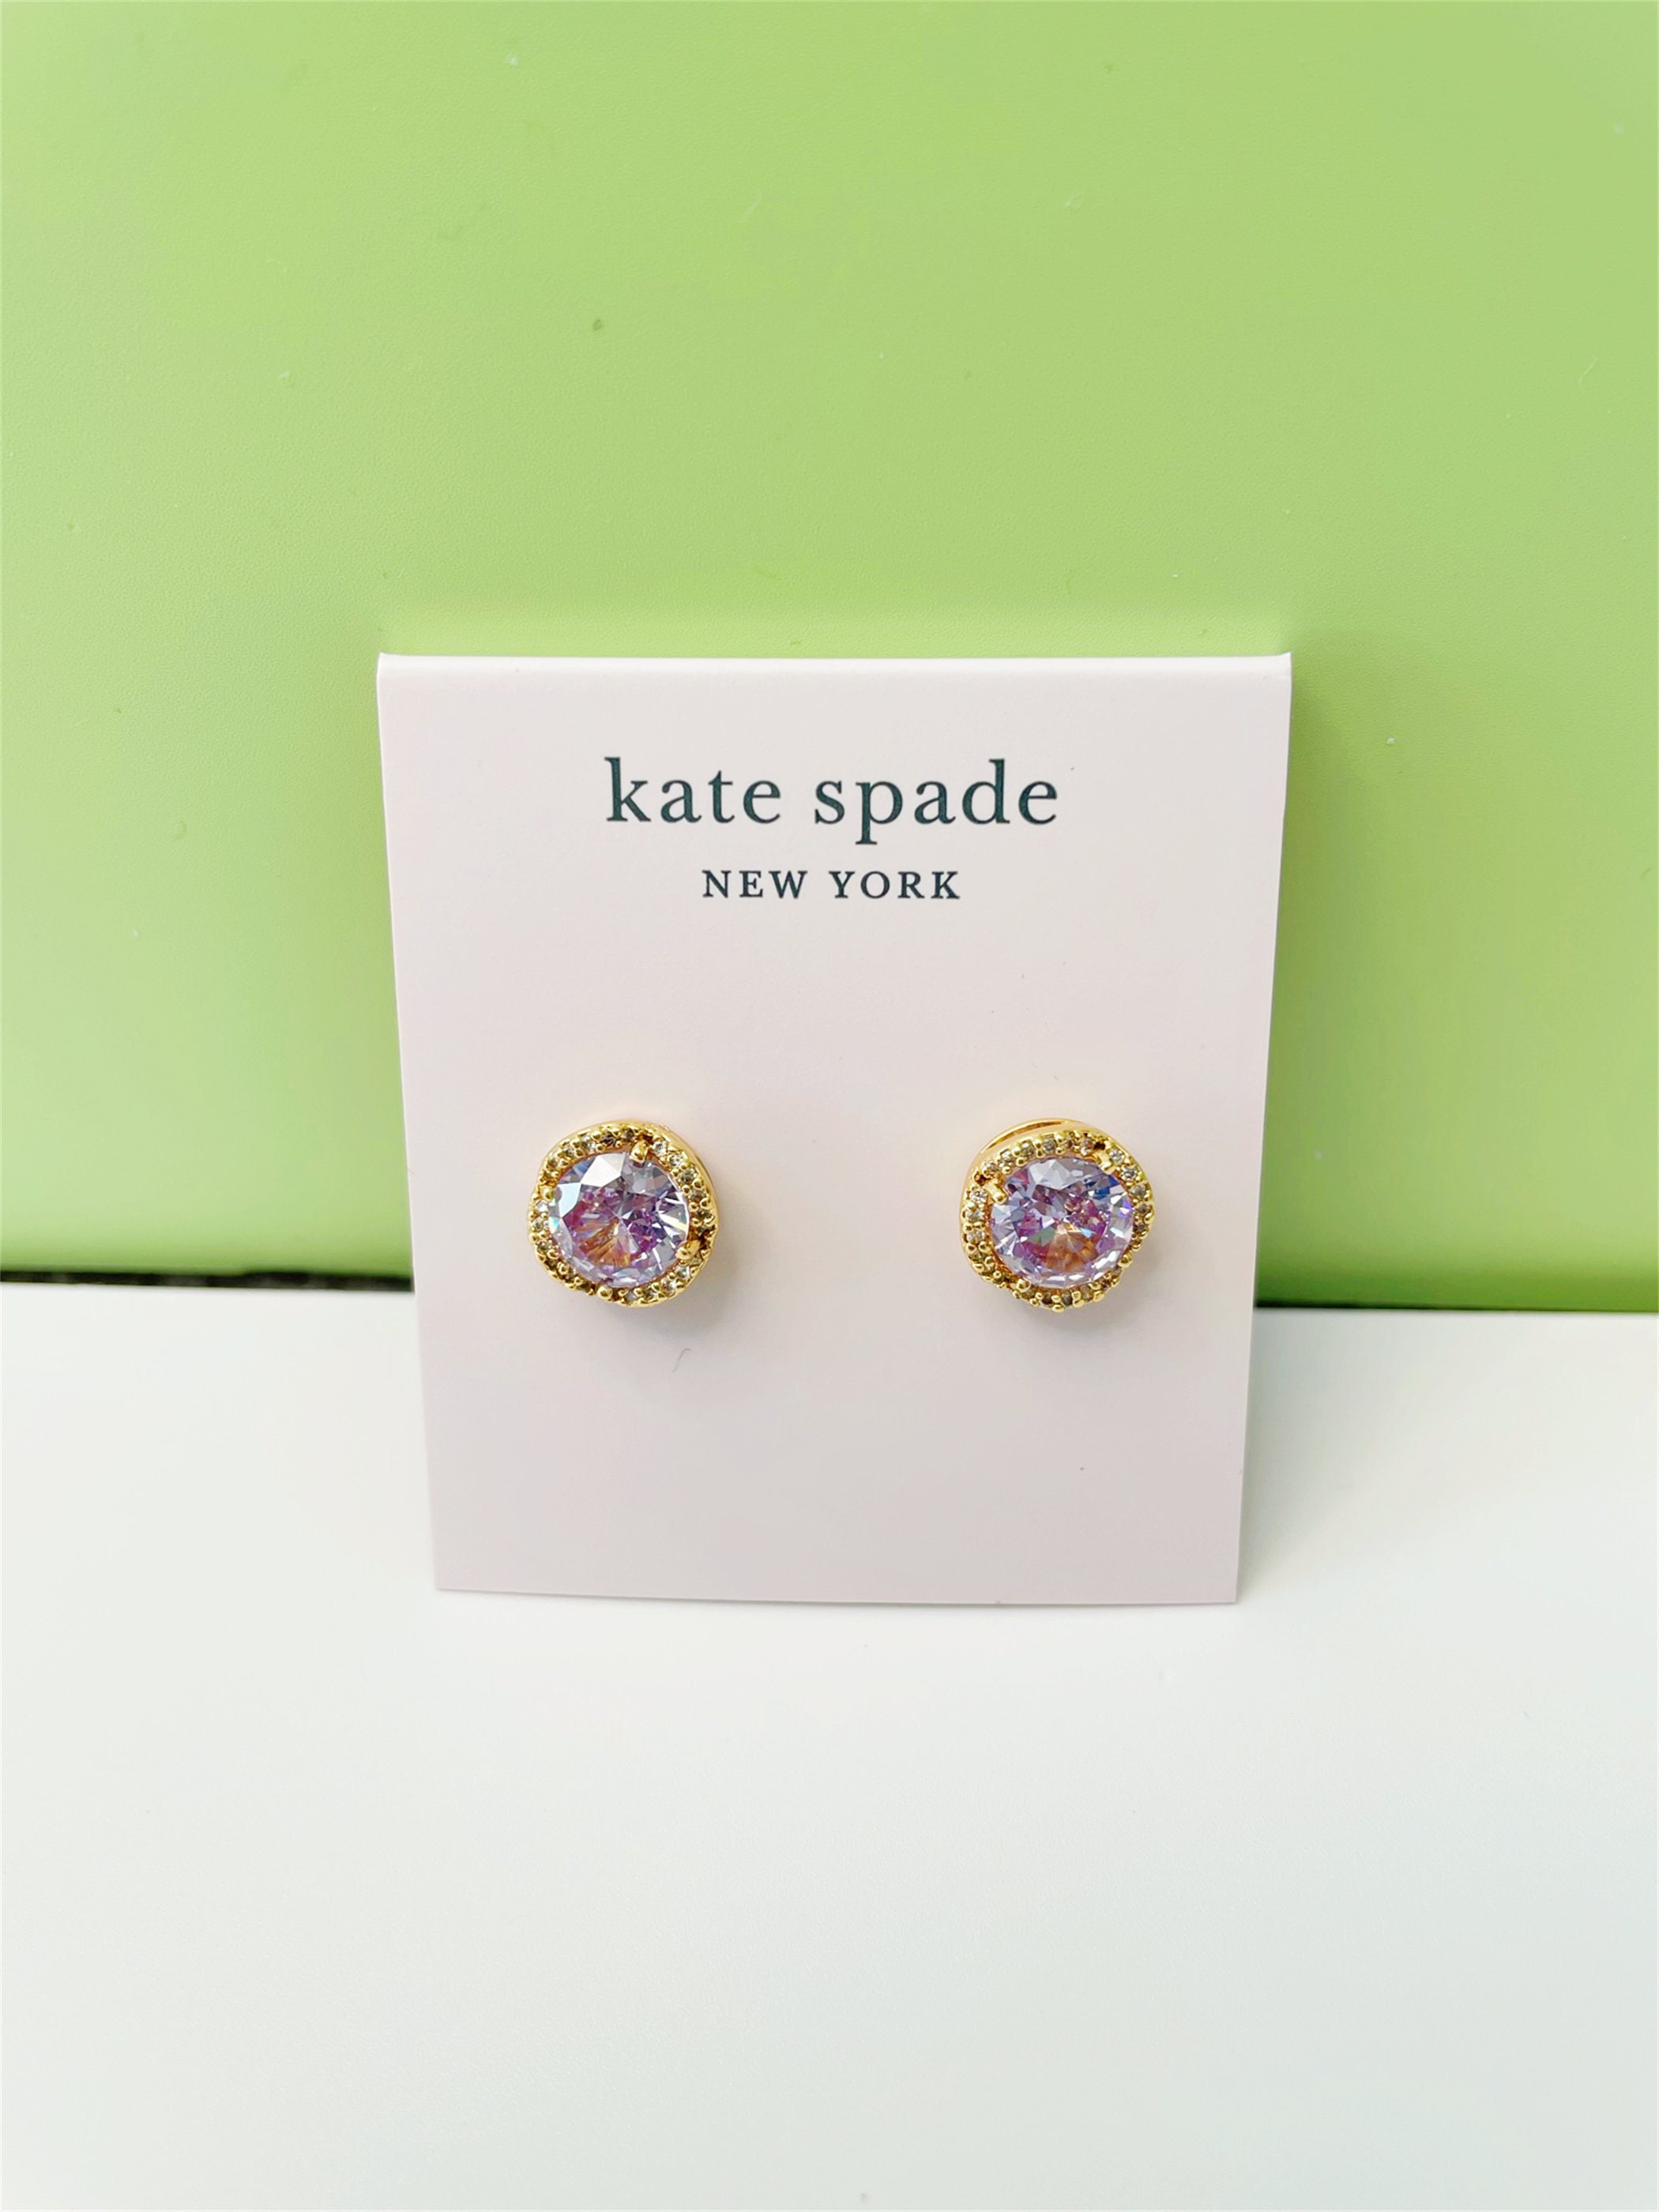 Kate Spade That Sparkle Round Earrings Studs in Purple BNWT - Etsy